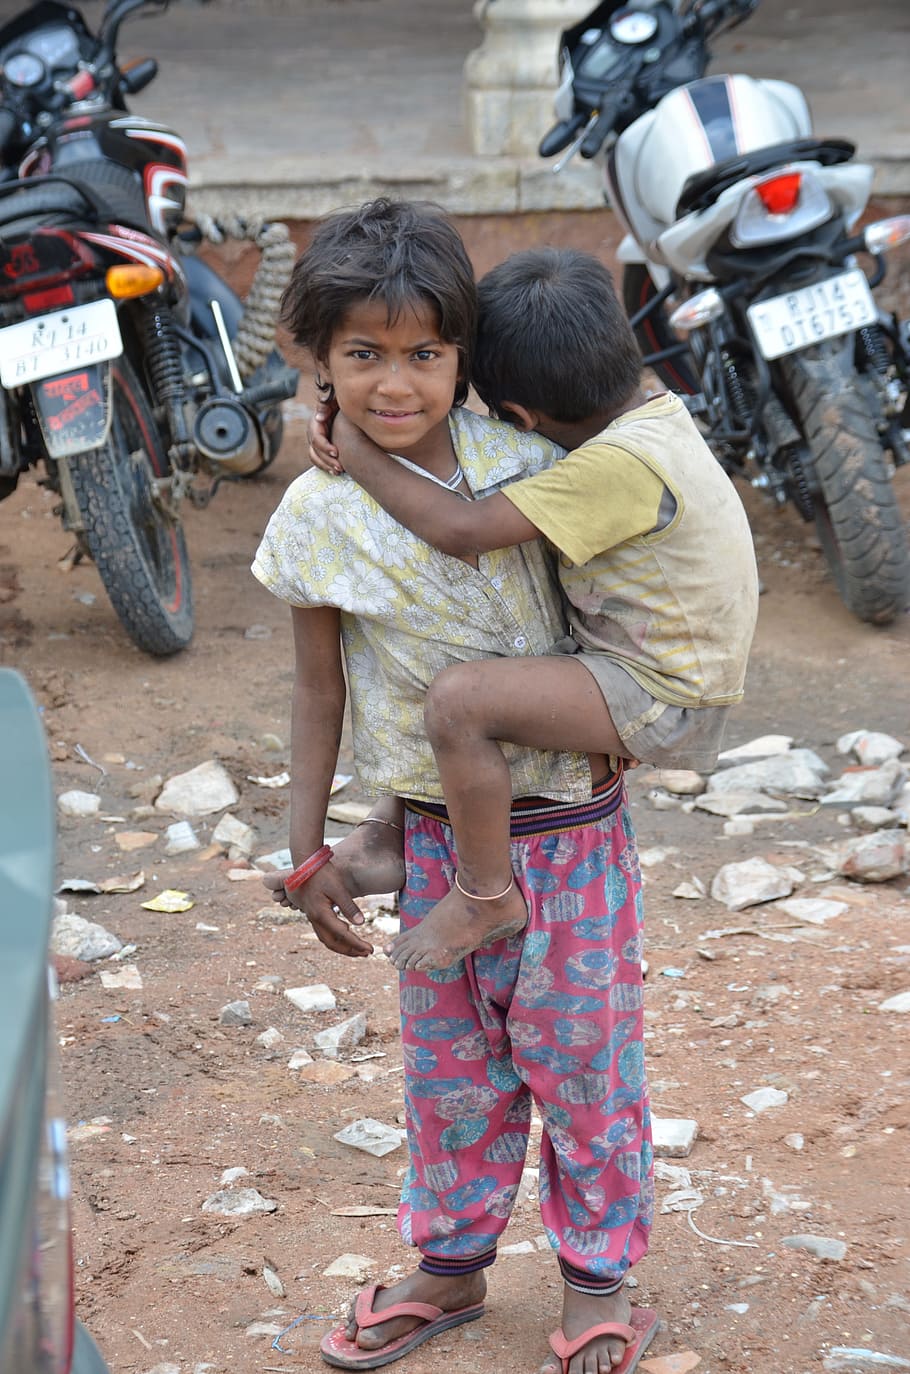 child, carrying, toddler, standing, parked, motorcycles, daytime, brothers, poverty, begging